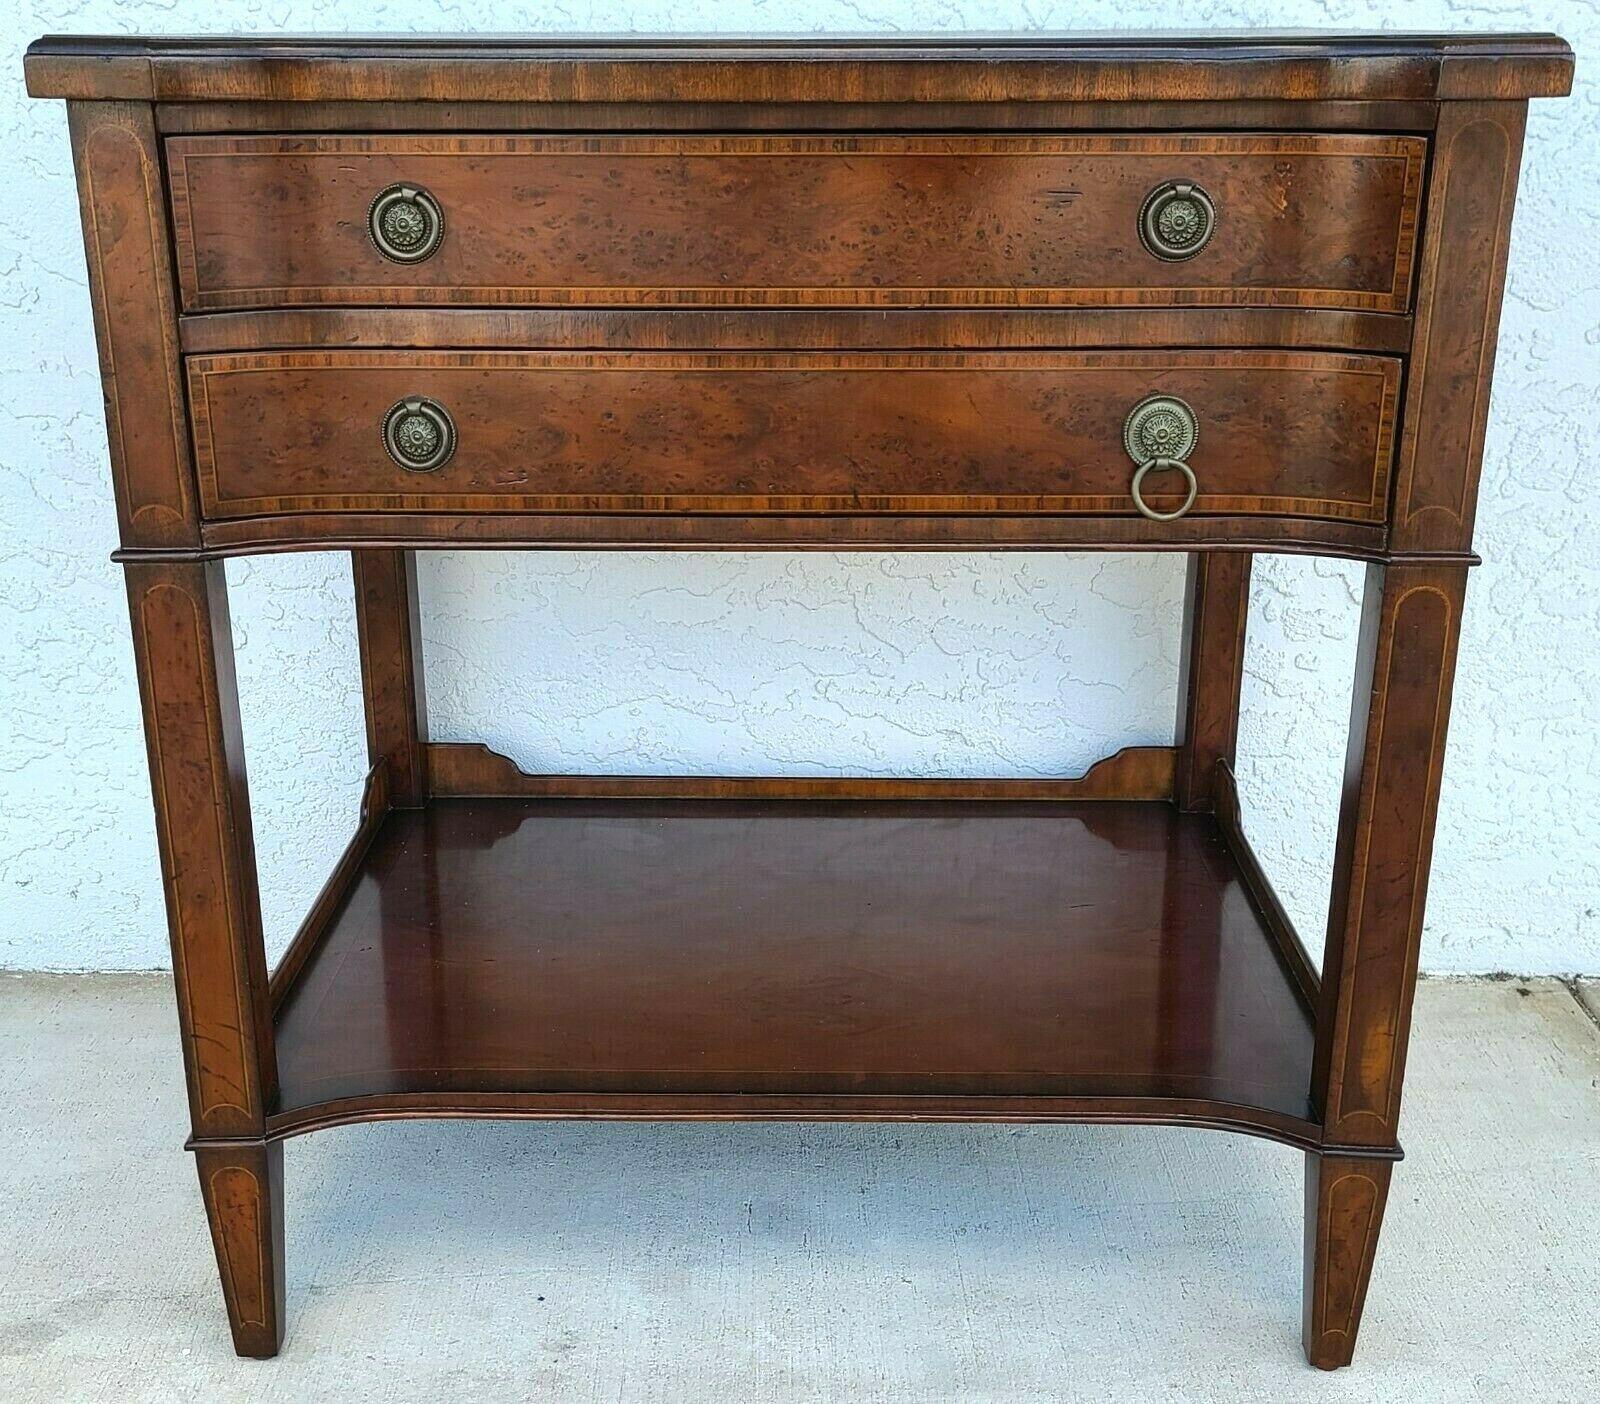 For full item description be sure to click on CONTINUE READING at the bottom of this listing.

Offering one of our recent Palm Beach estate fine furniture acquisitions of a
Maitland Smith 
Approximate measurements in Inchesburl side end